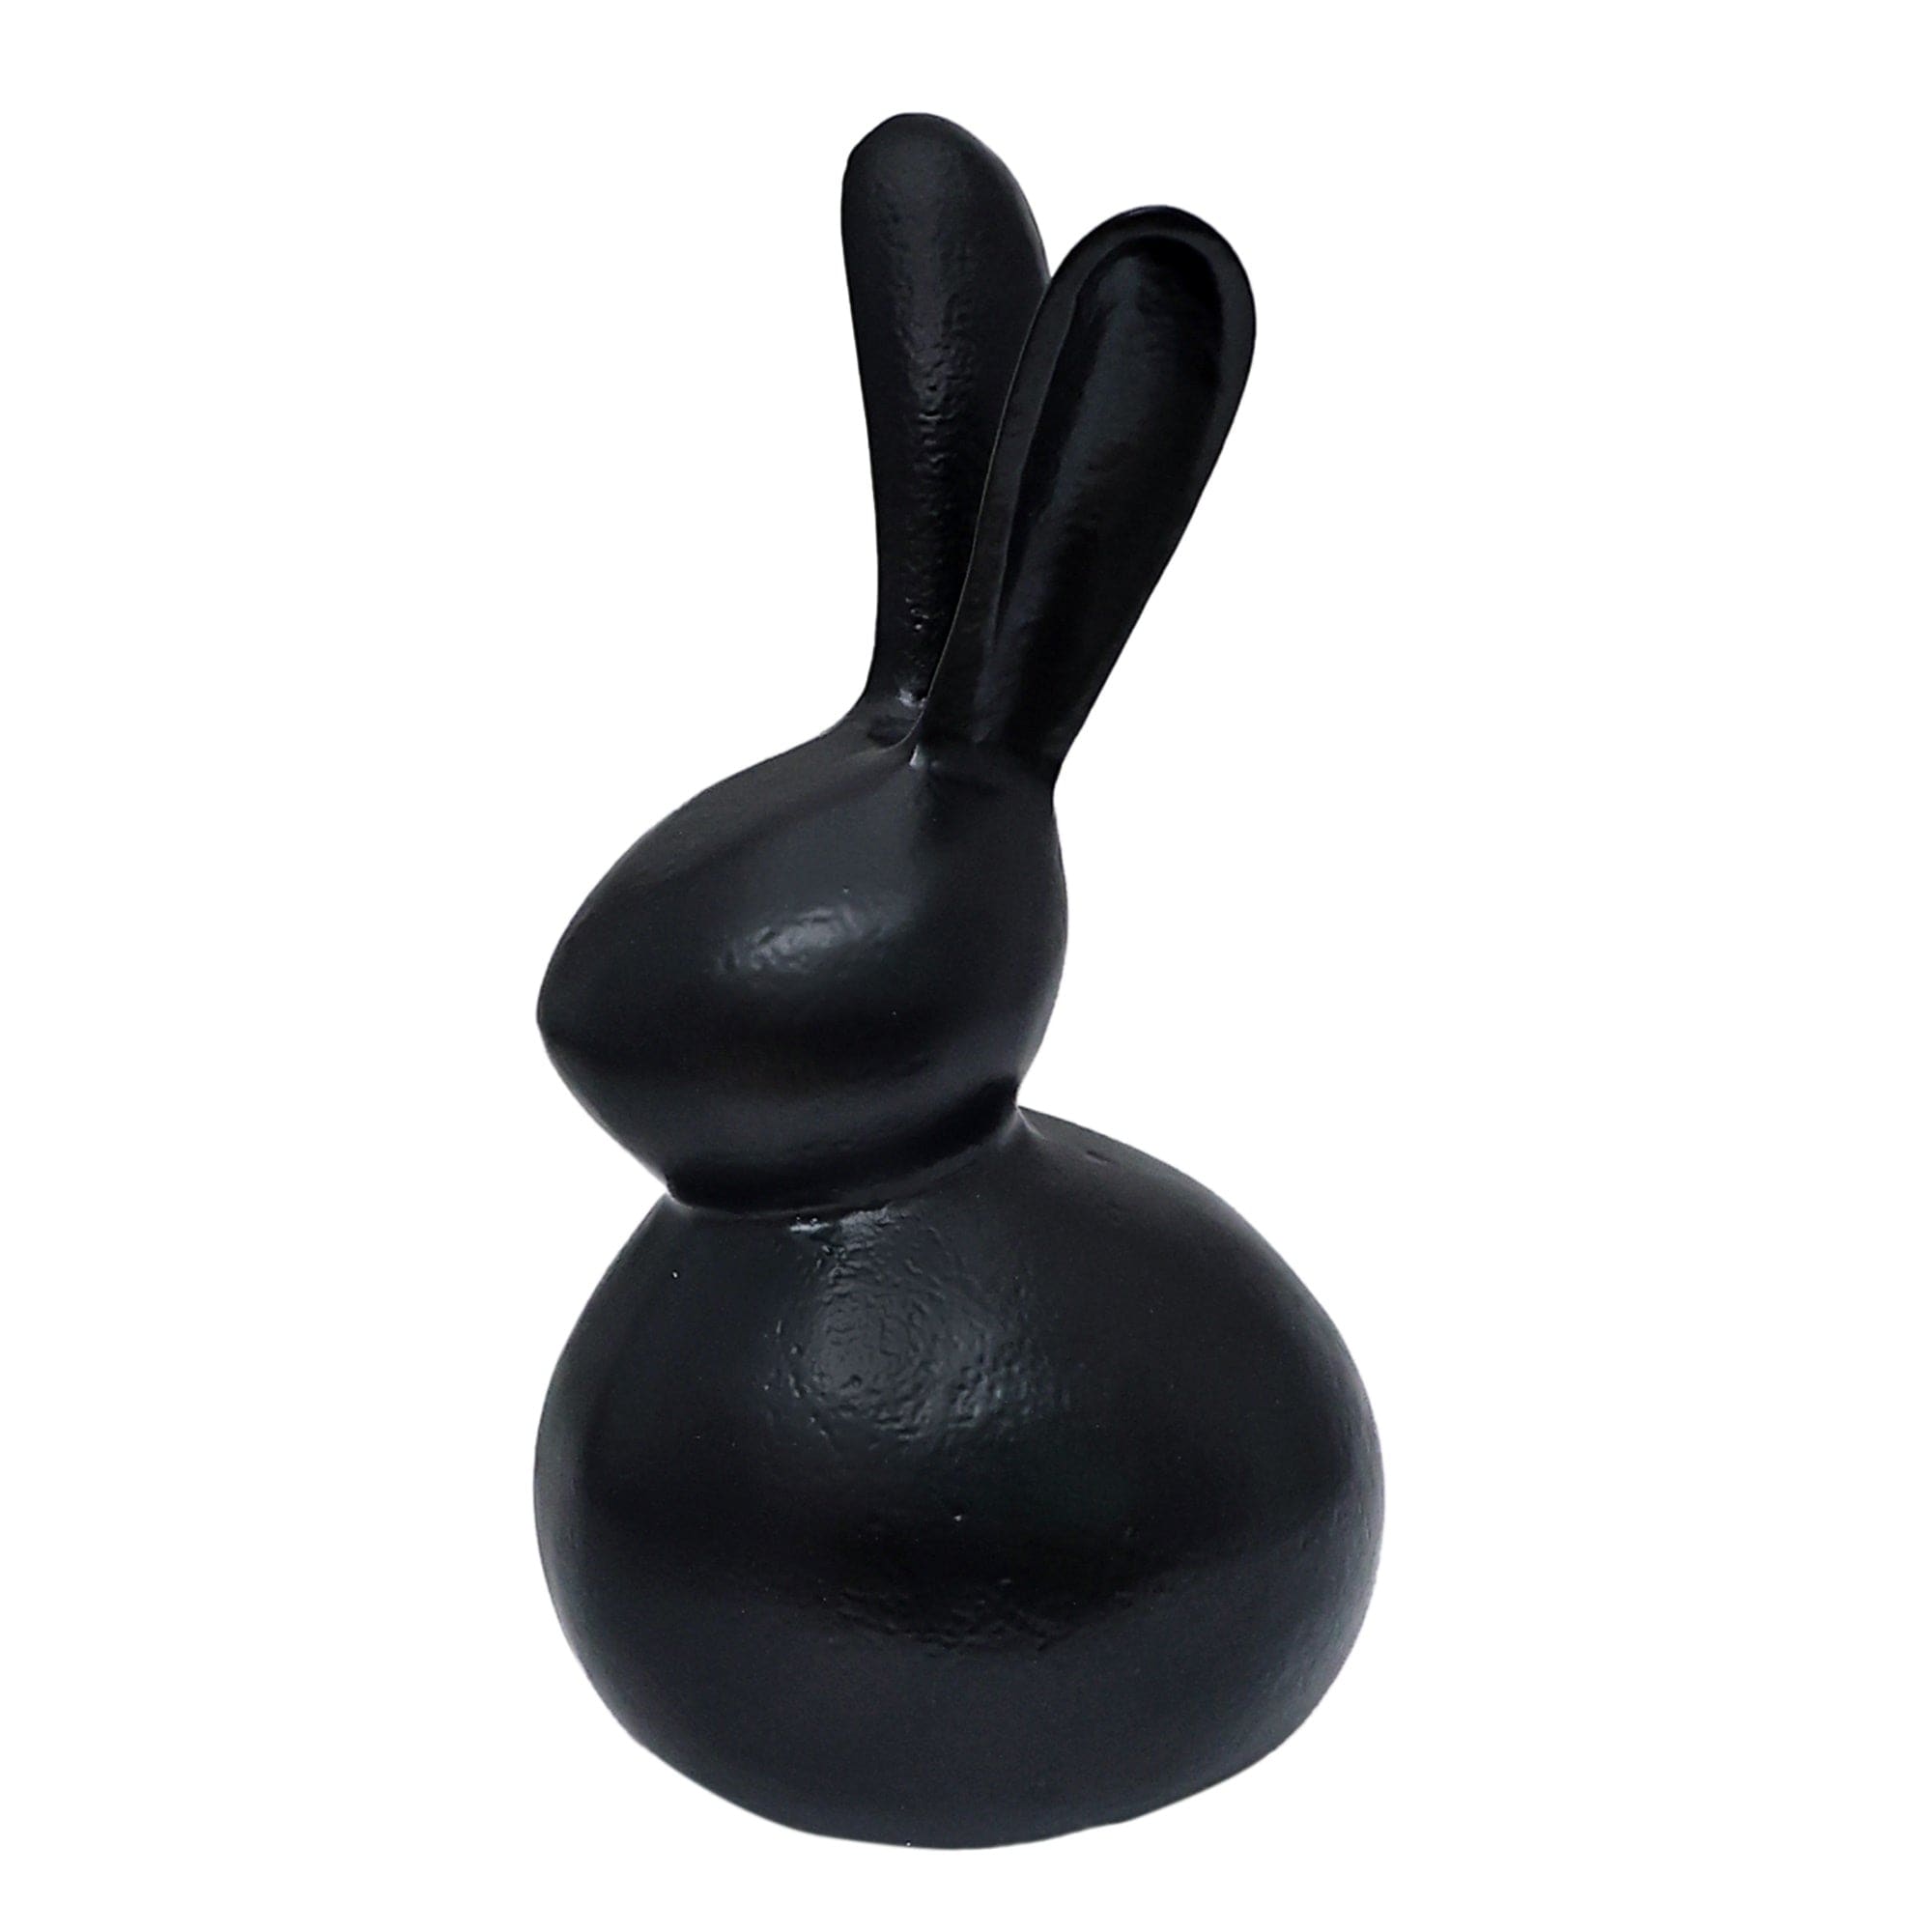 Abstract Hare Sculpture Black